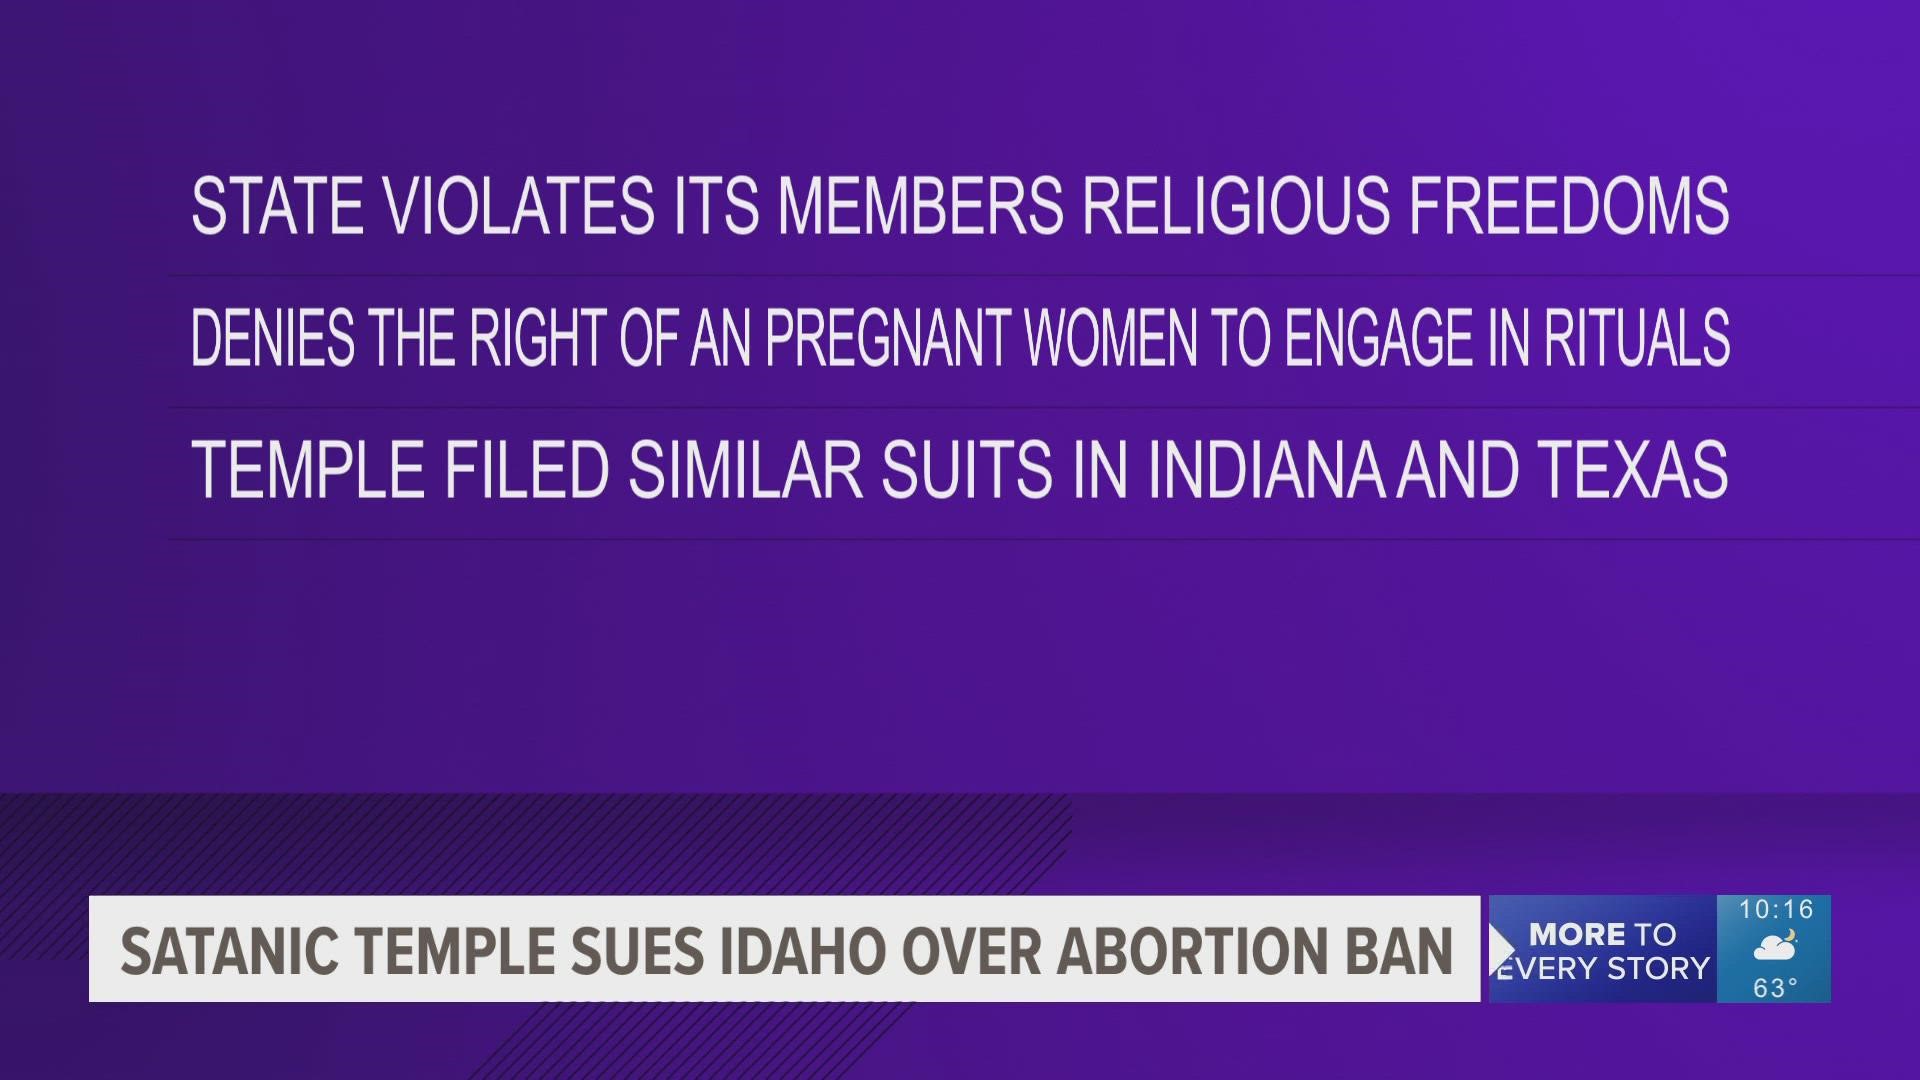 The Temple claims that 3,500 of its members are based in Idaho and that the state is infringing on their religious rights to practice abortion.